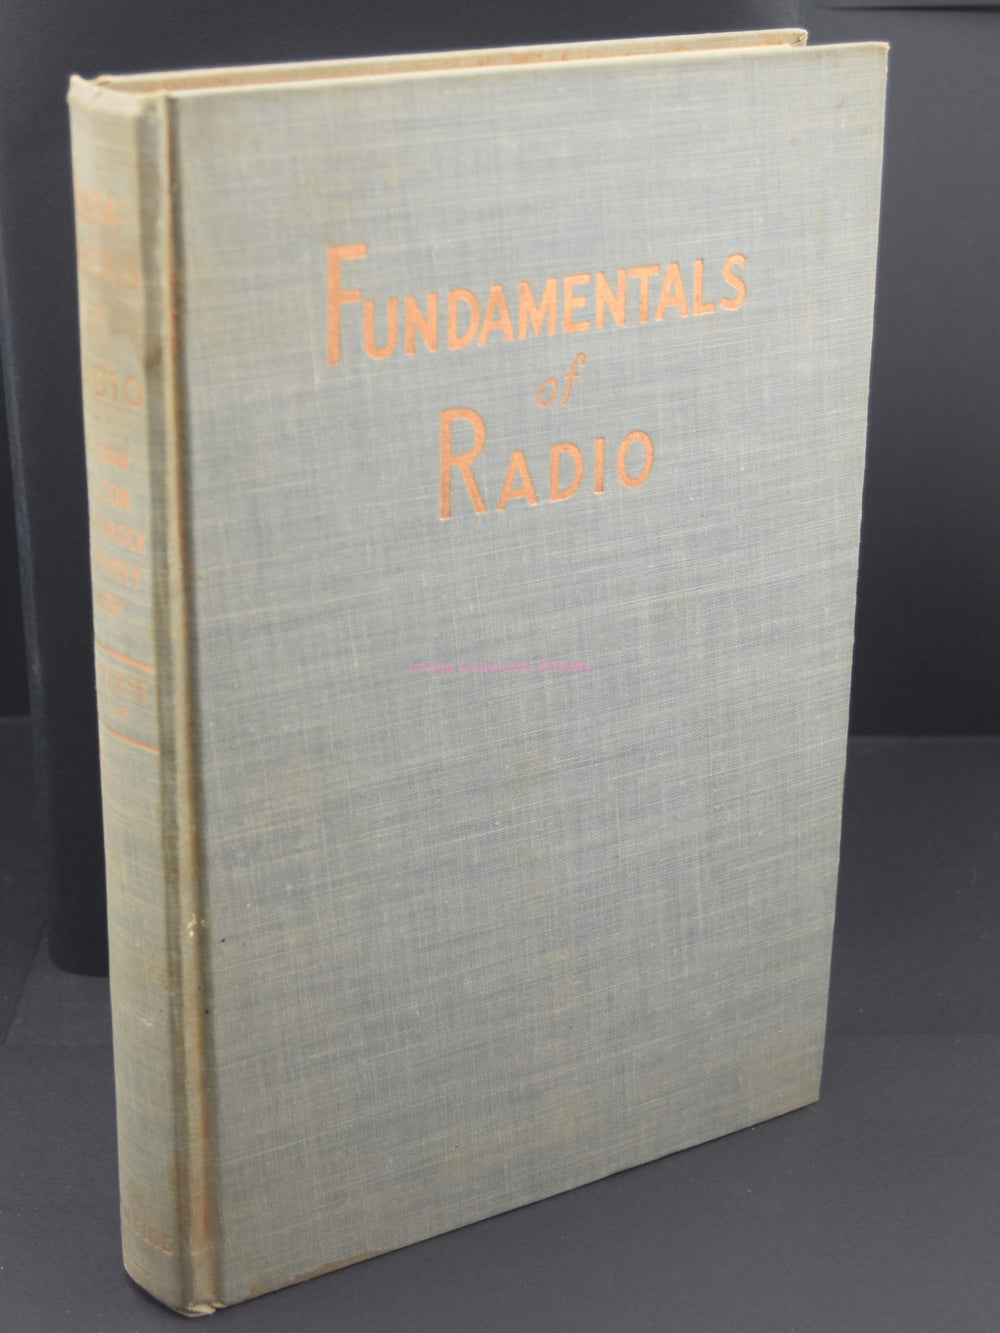 Fundamentals Of Radio - Dave's Hobby Shop by W5SWL